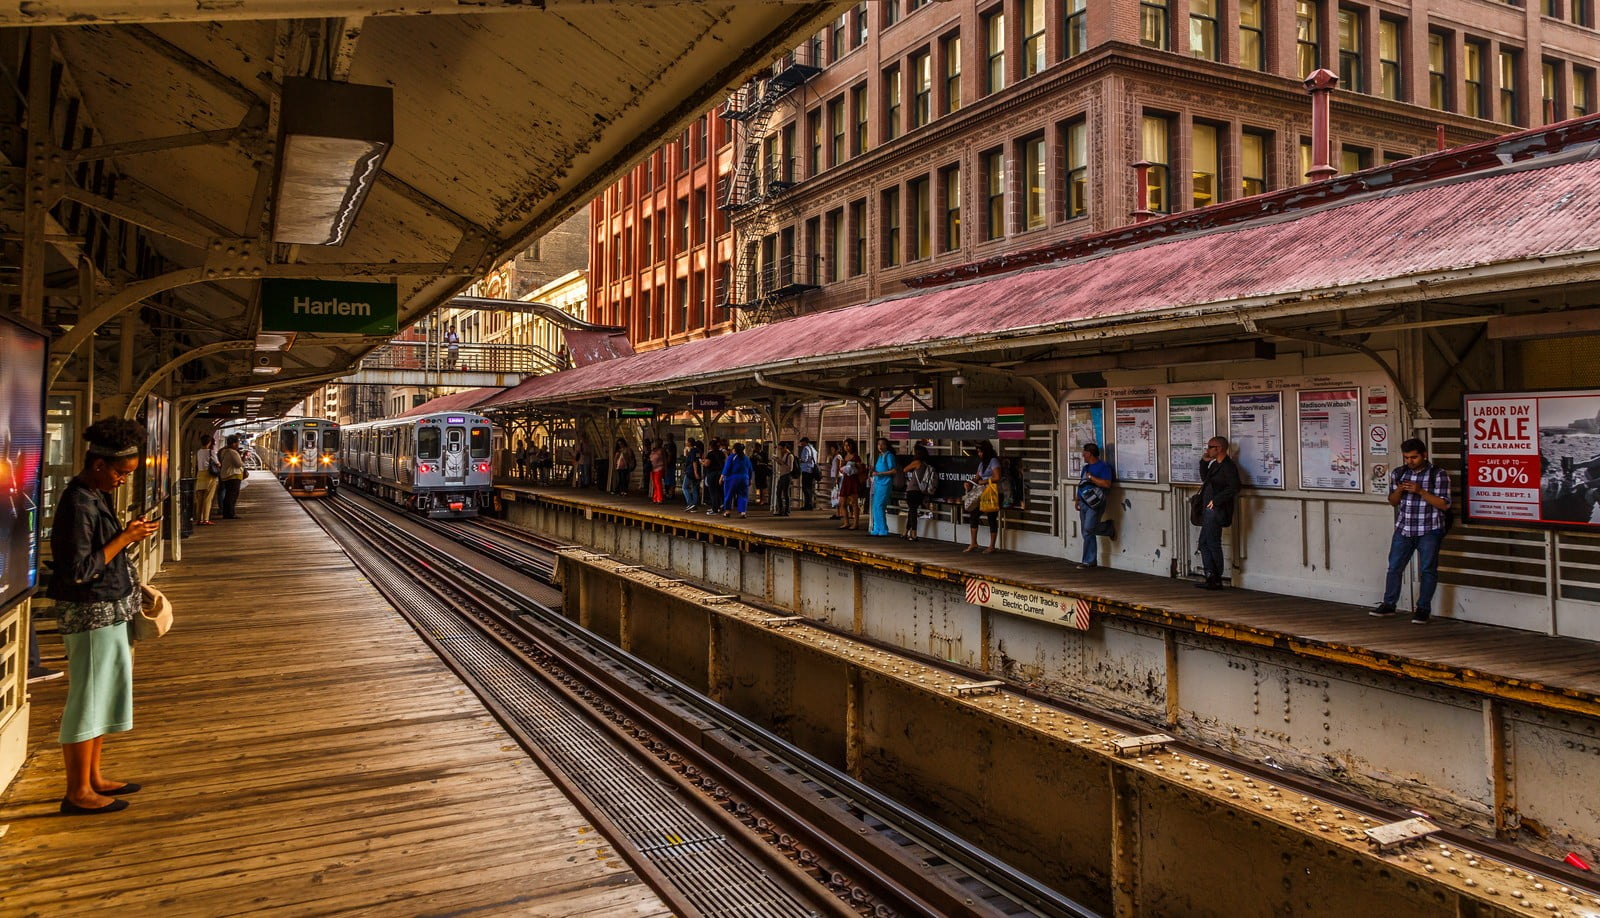 women's black top, subway, Chicago, HDR, train, city, people